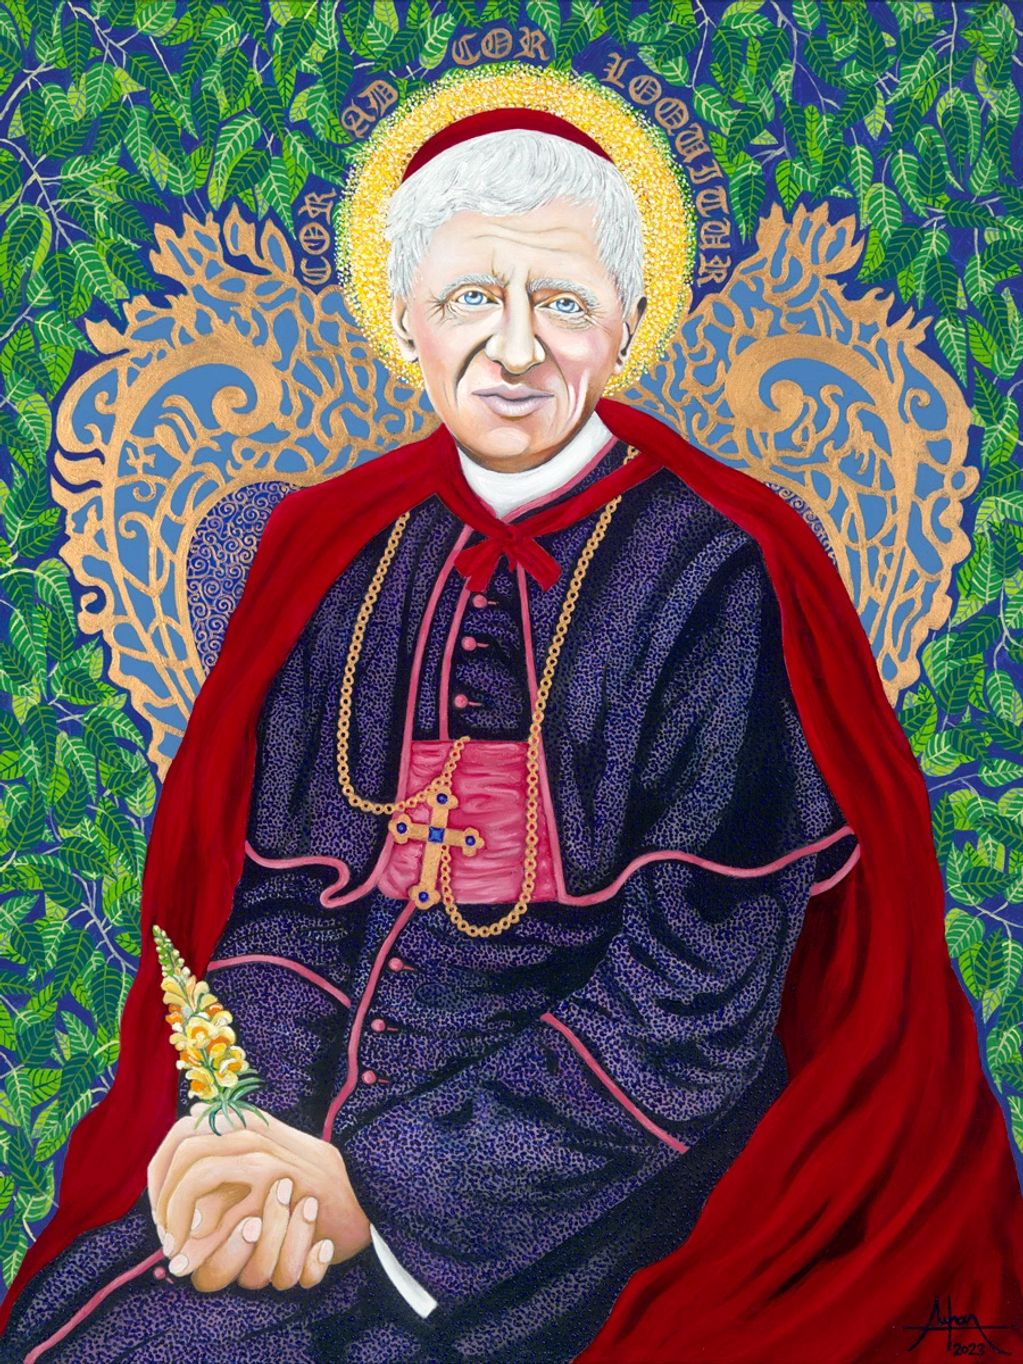 * GENTLE HEART
(Saint John Henry Newman, 1801-1890)

Oil on gallery-wrapped canvas
40(h) x 30(w) inc